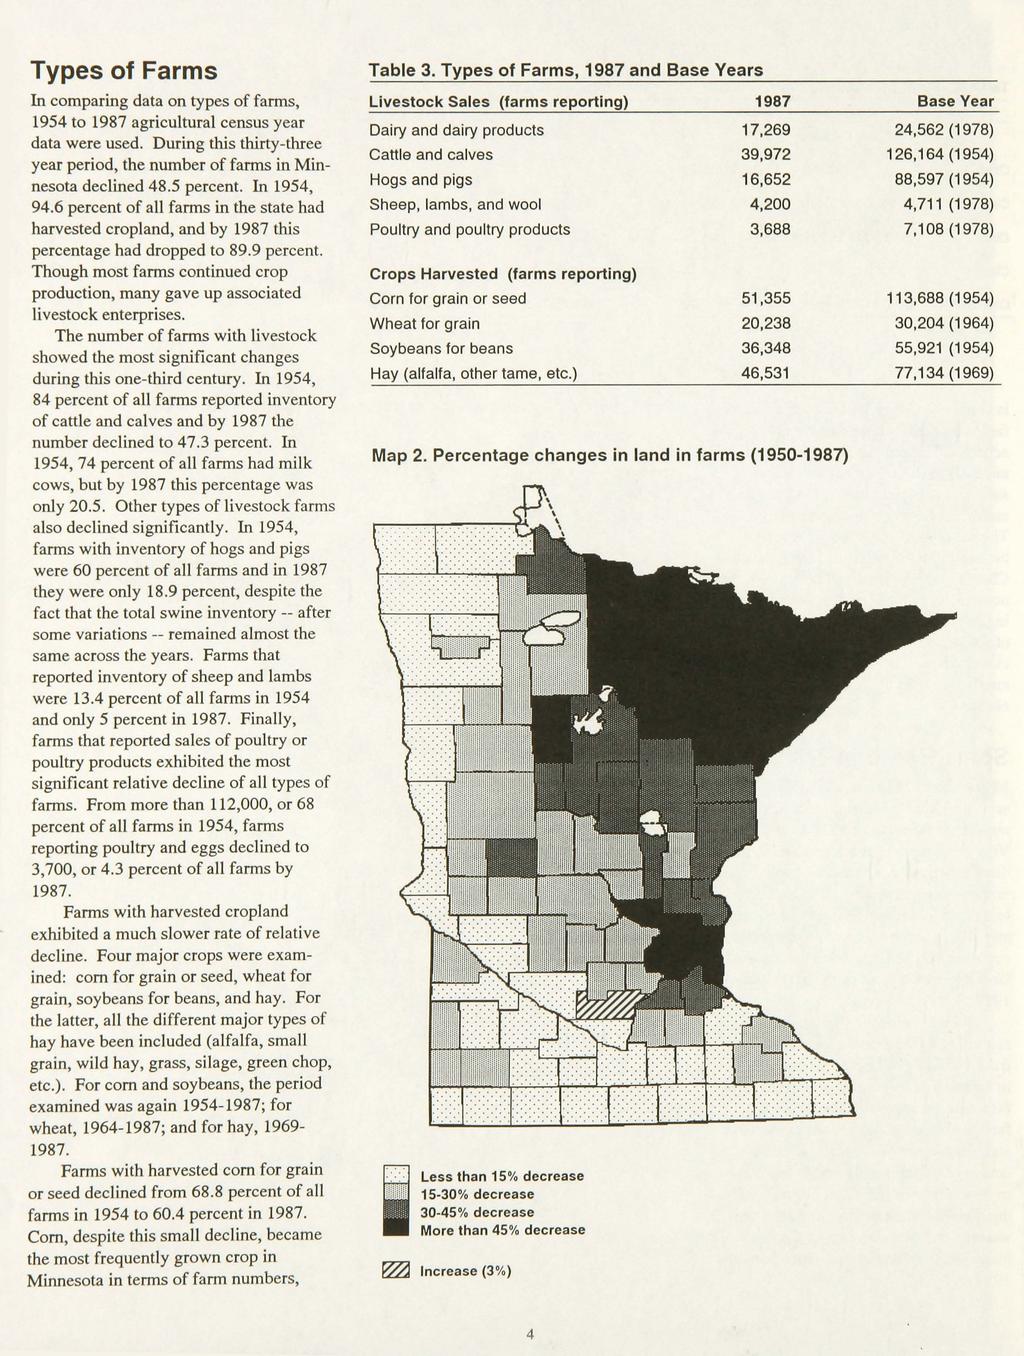 Types of Farms In comparing data on types of farms, 1954 to 1987 agricultural census year data were used. During this thirty-three year period, the number of farms in Minnesota declined 48.5 percent.